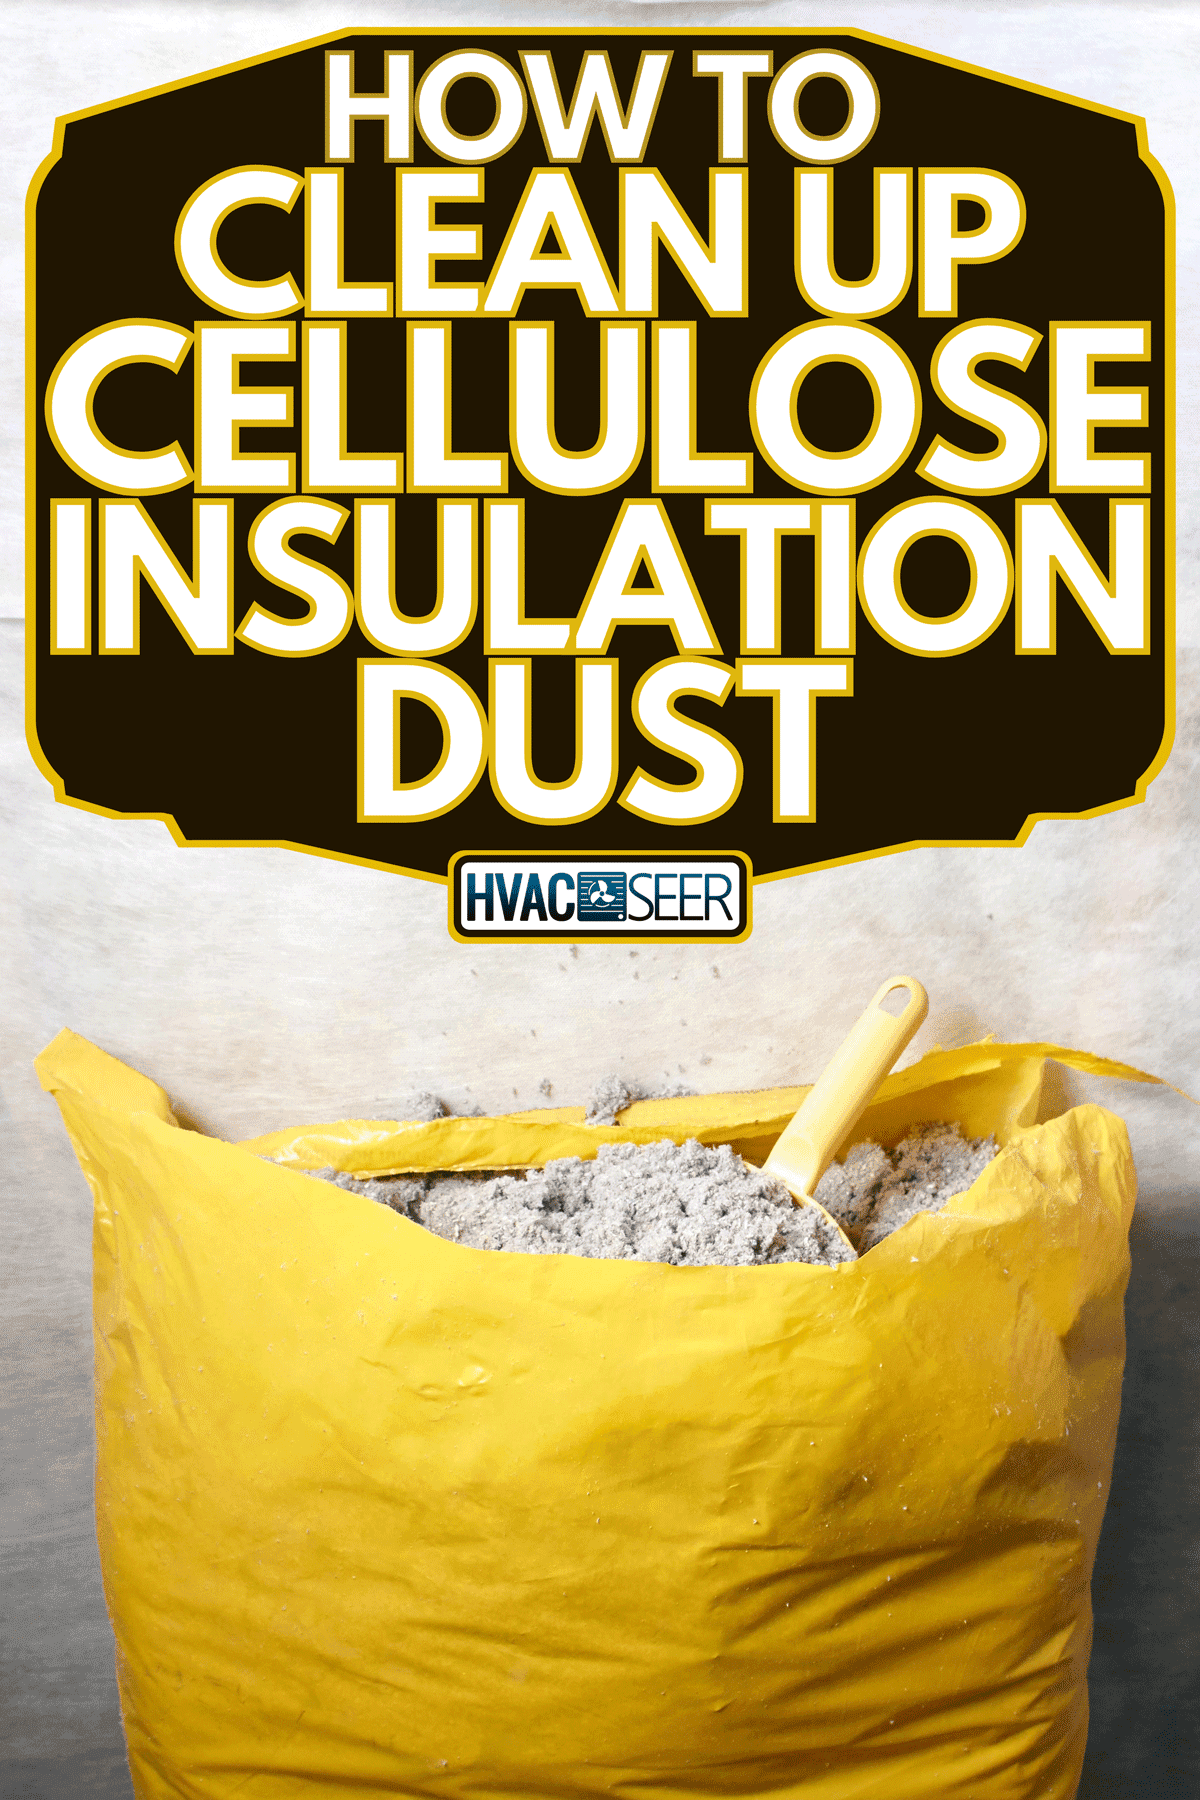 Cellulose insulation made from recycled paper, How To Clean Up Cellulose Insulation Dust